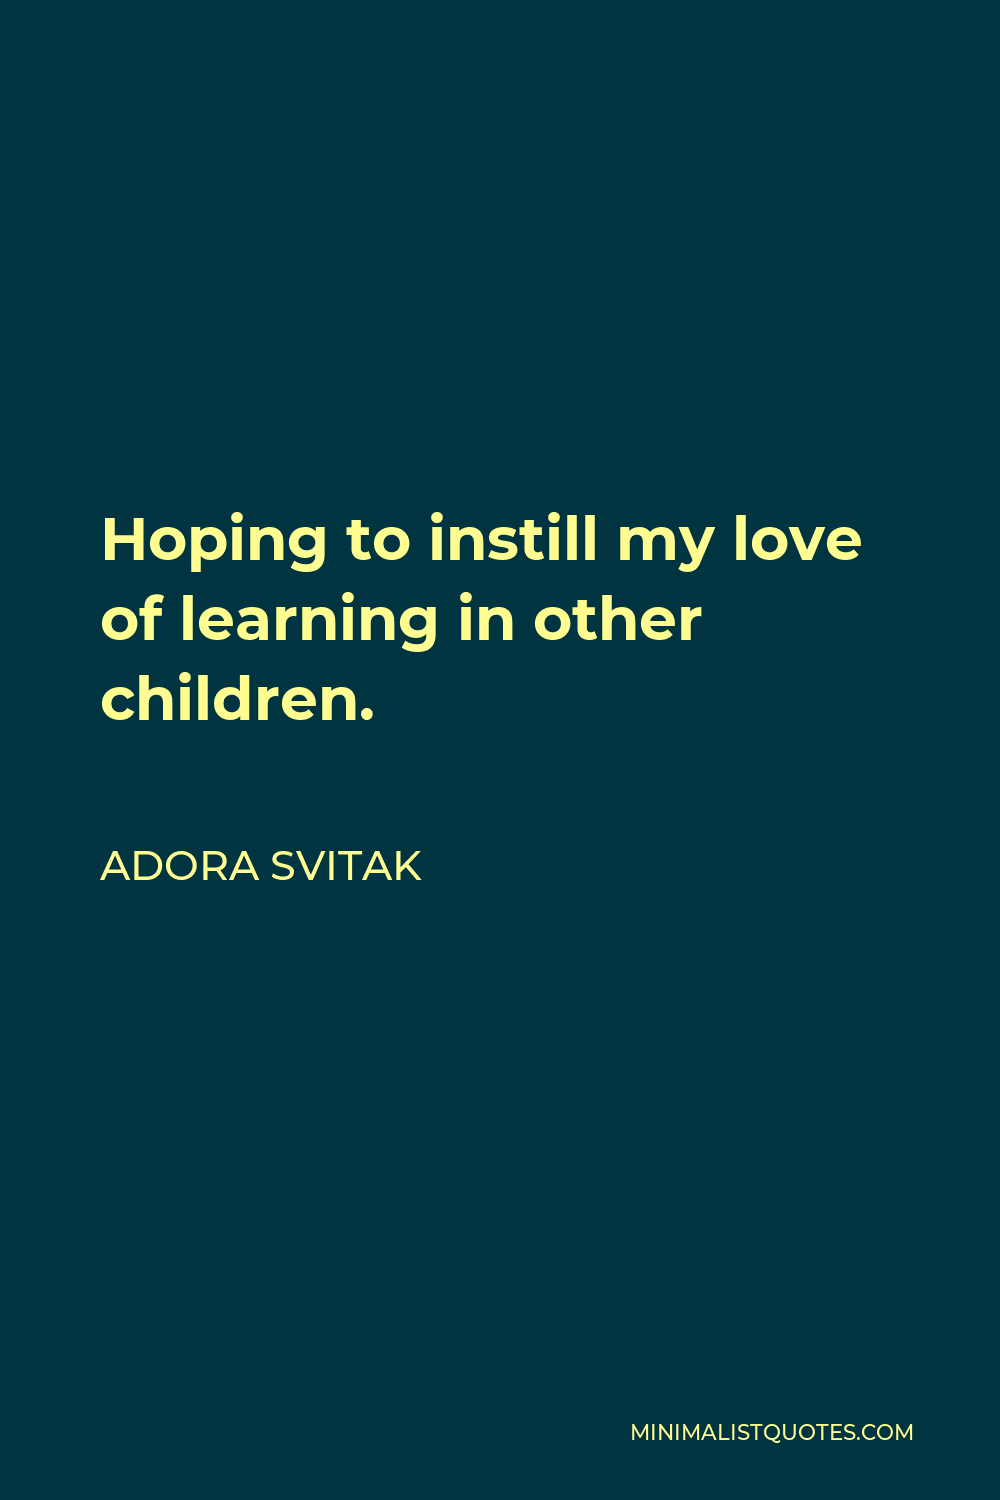 Adora Svitak Quote - Hoping to instill my love of learning in other children.